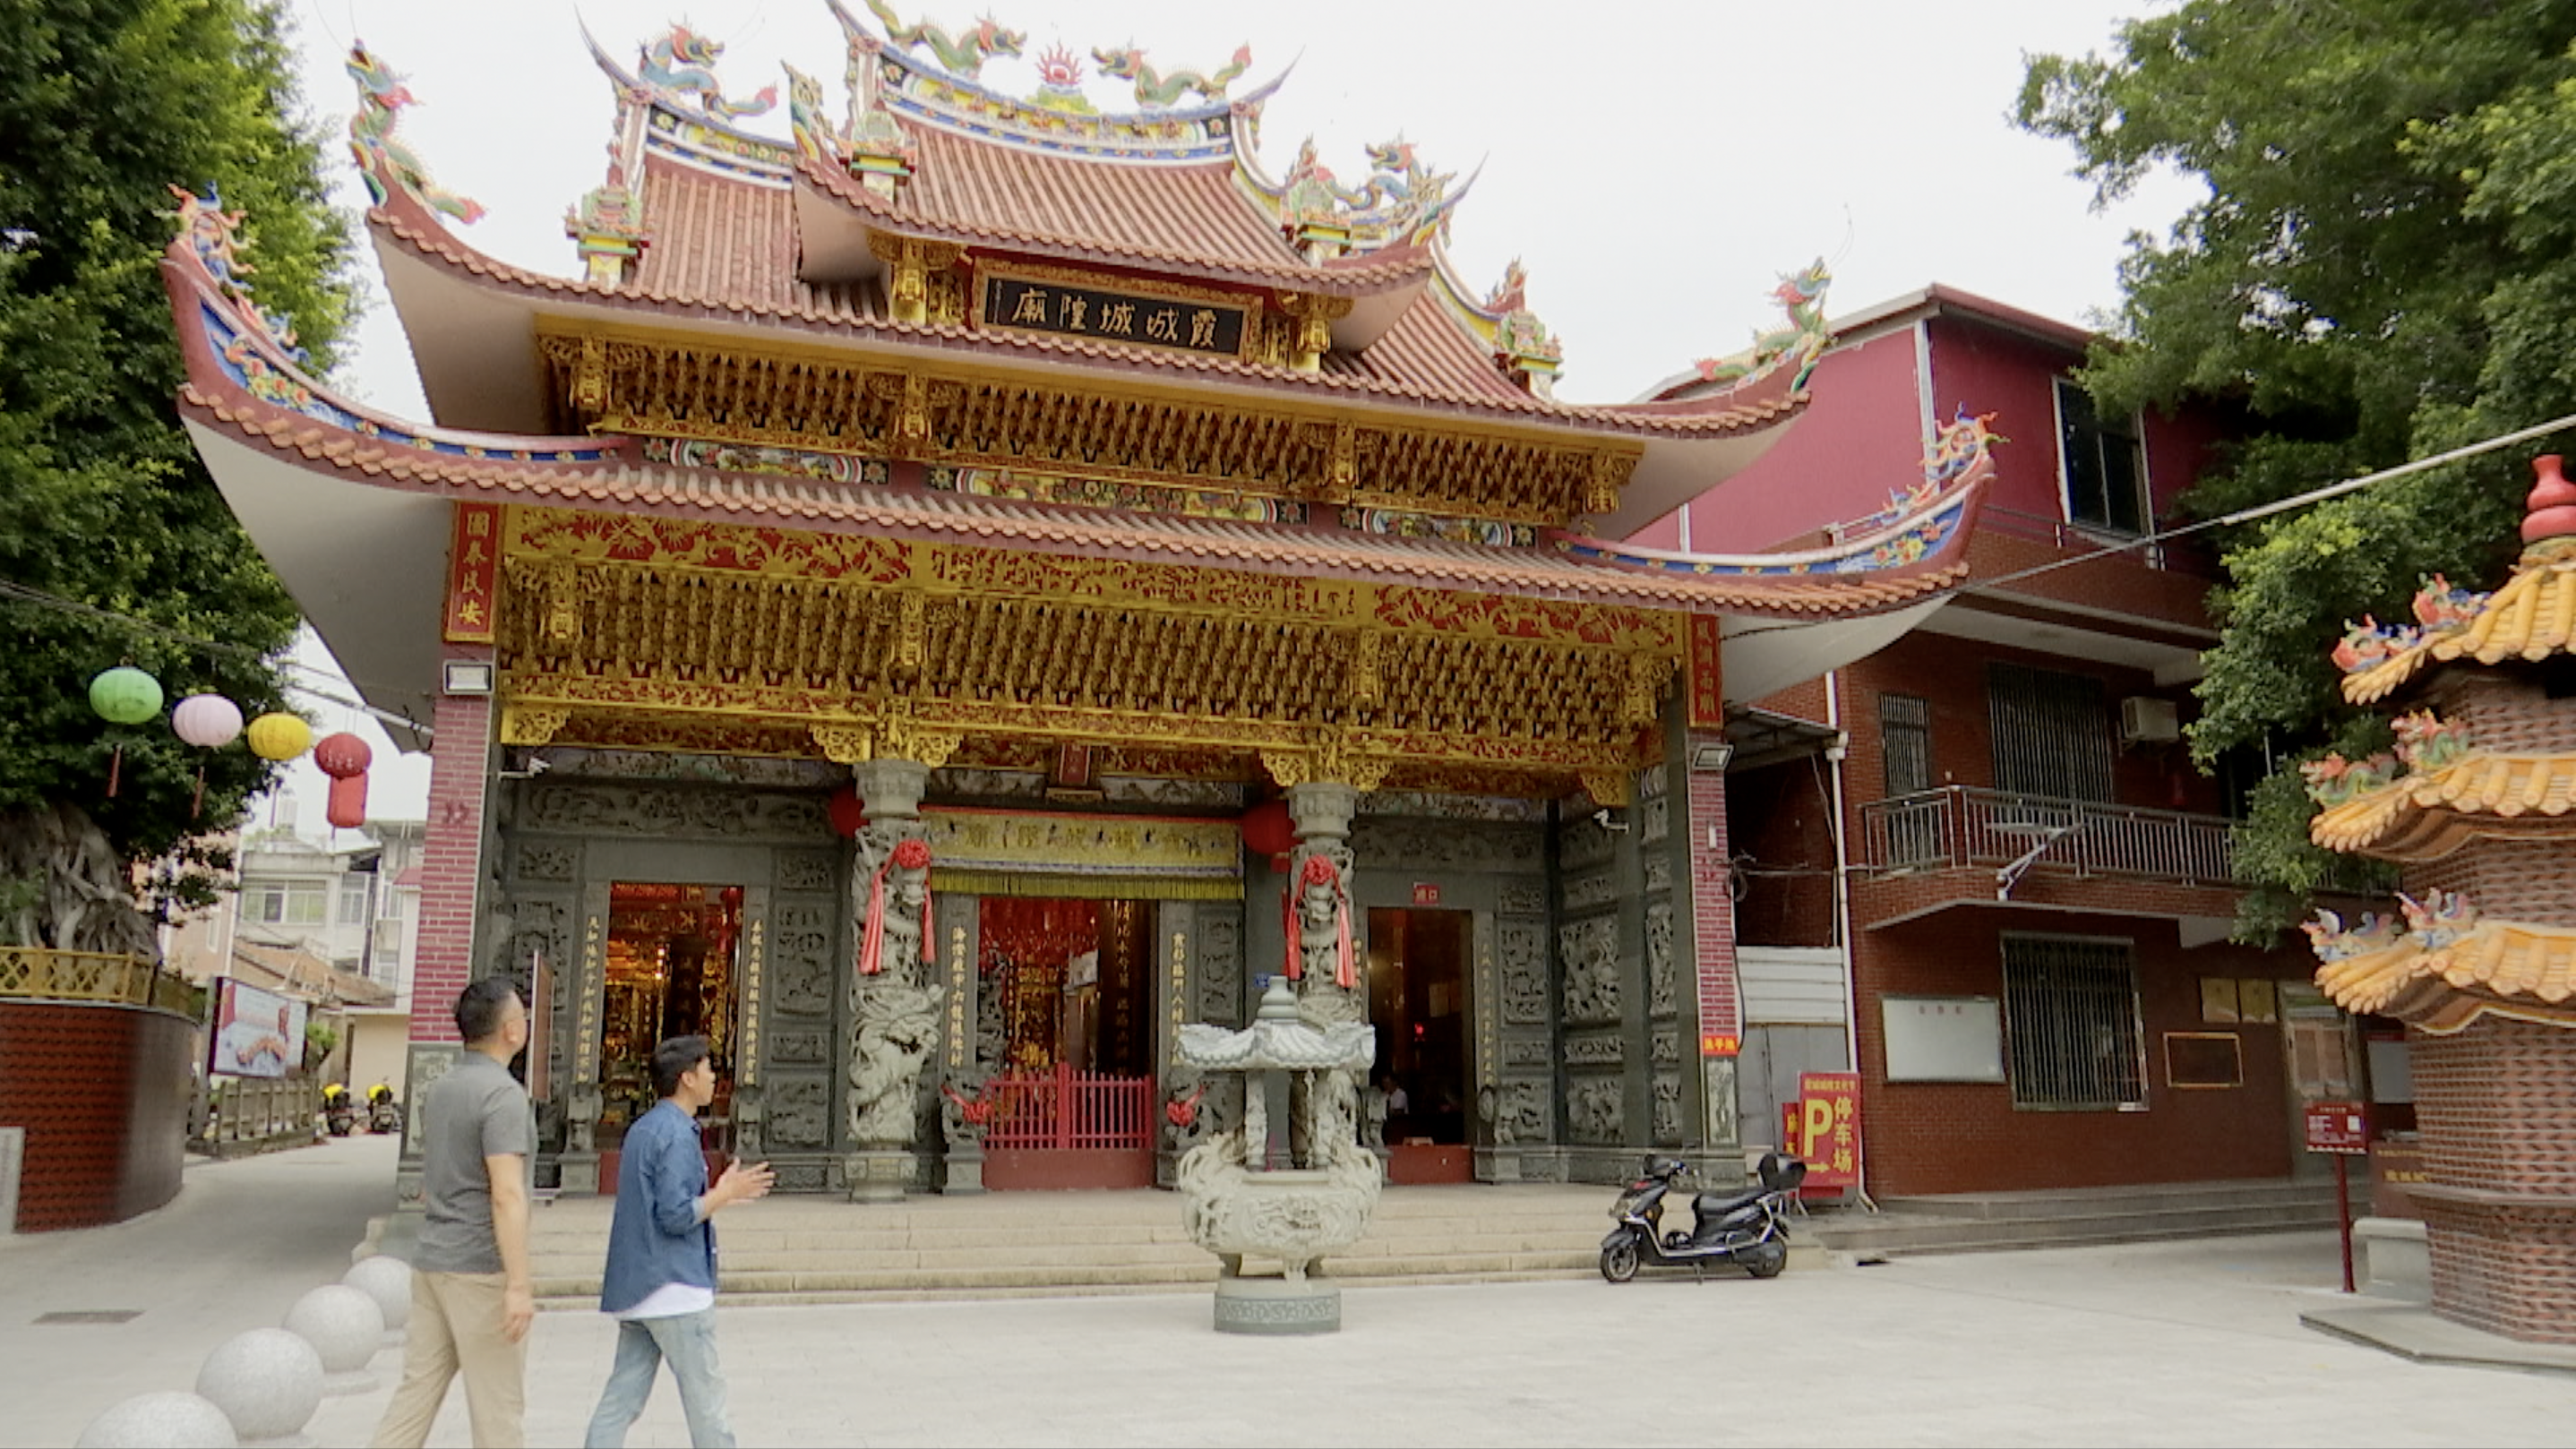 The City God Temple in Chengxia Village in the city of Xiamen is viewed by Taiwan locals as the origin of a famous temple in Taipei. /CGTN